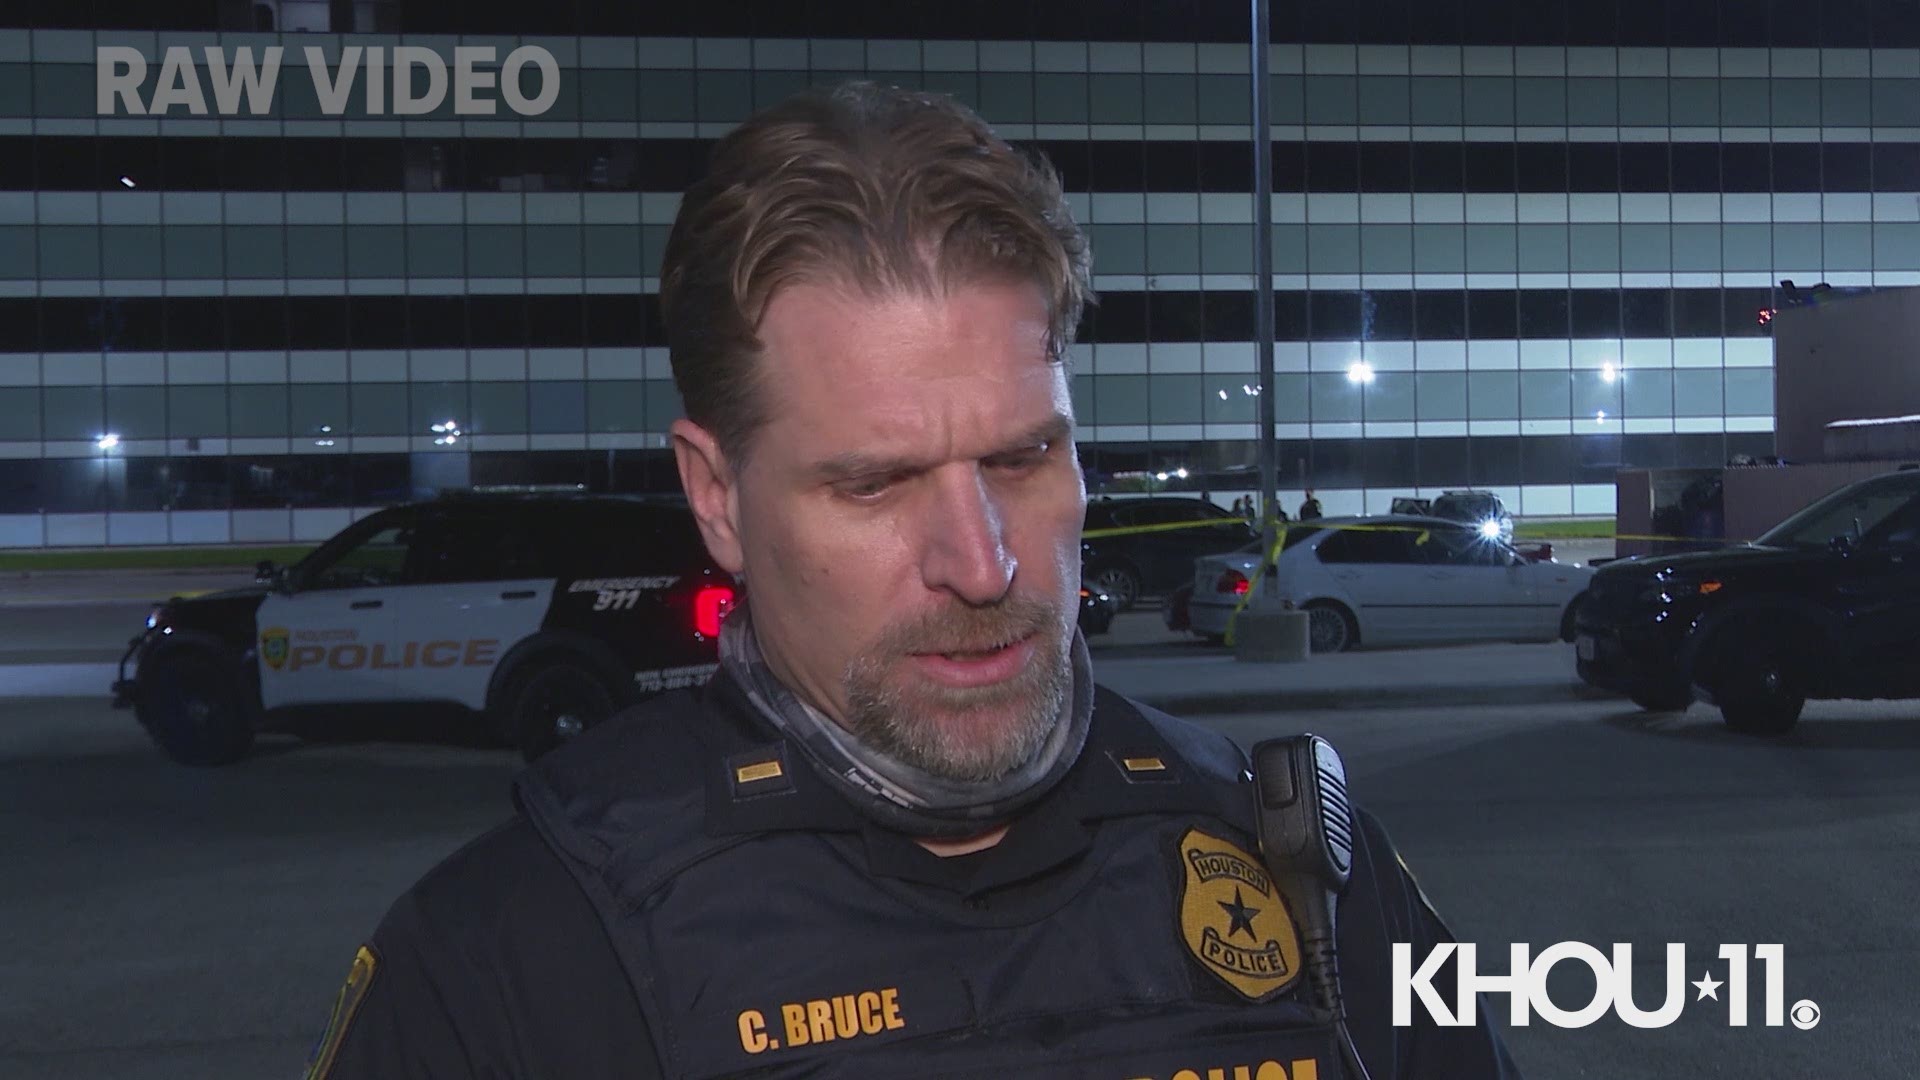 Houston police have three suspects in custody after a man was shot and killed during a shootout over the weekend. HPD Lt. Chris Bruce shares more details.